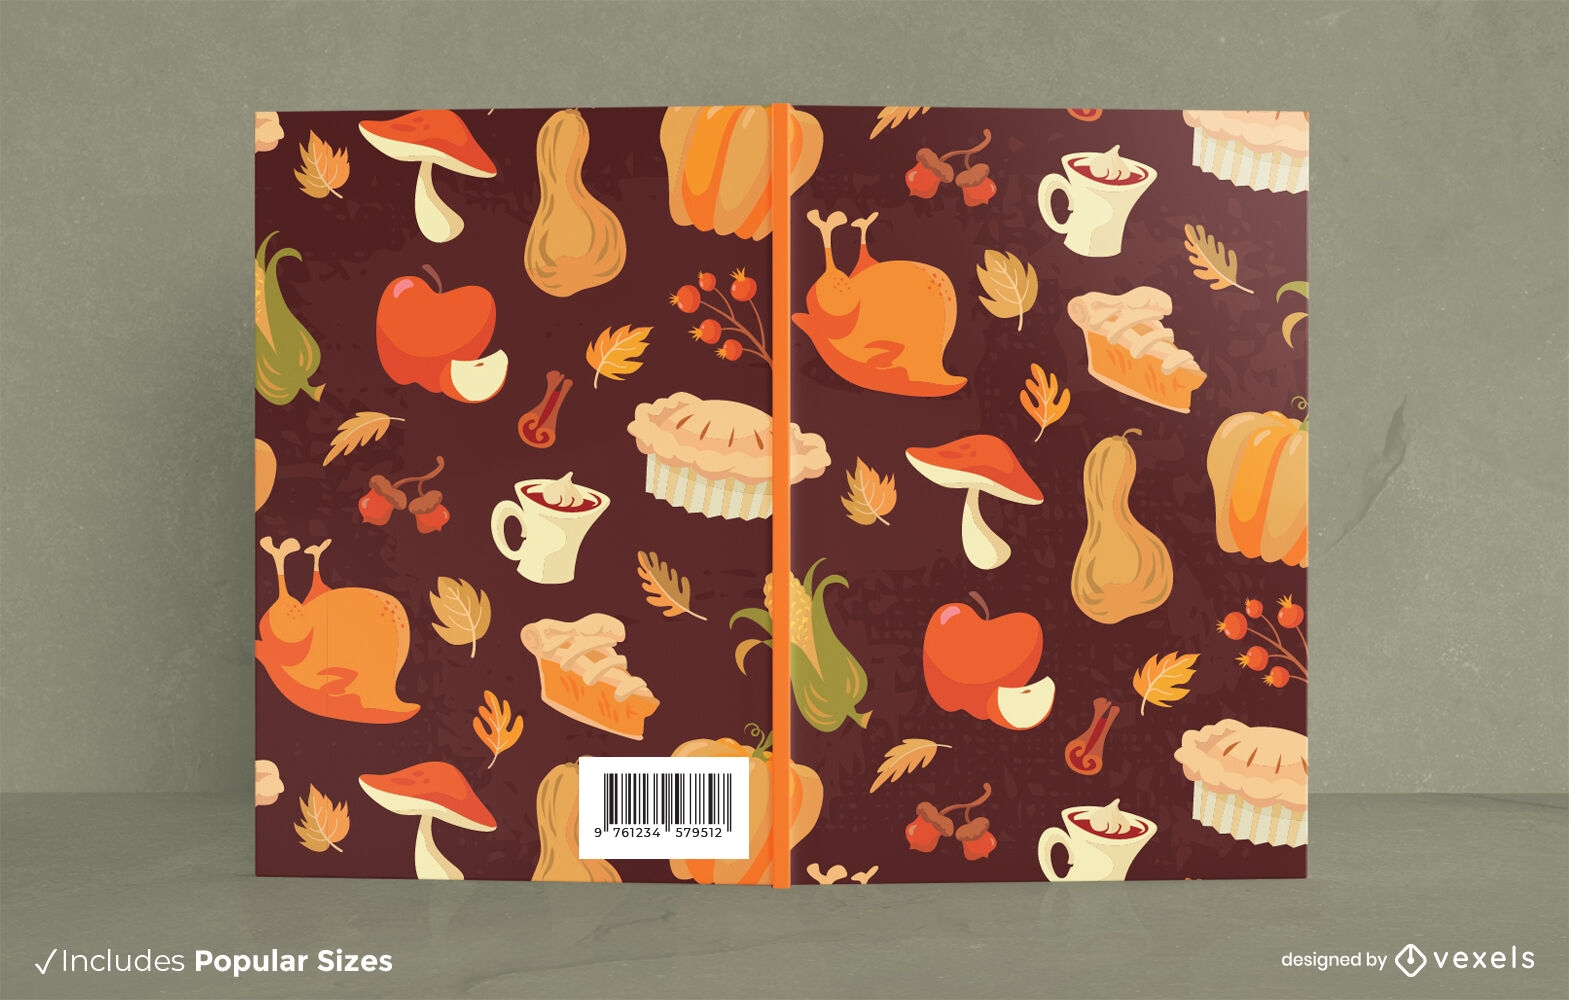 Thanksgiving meals book cover design